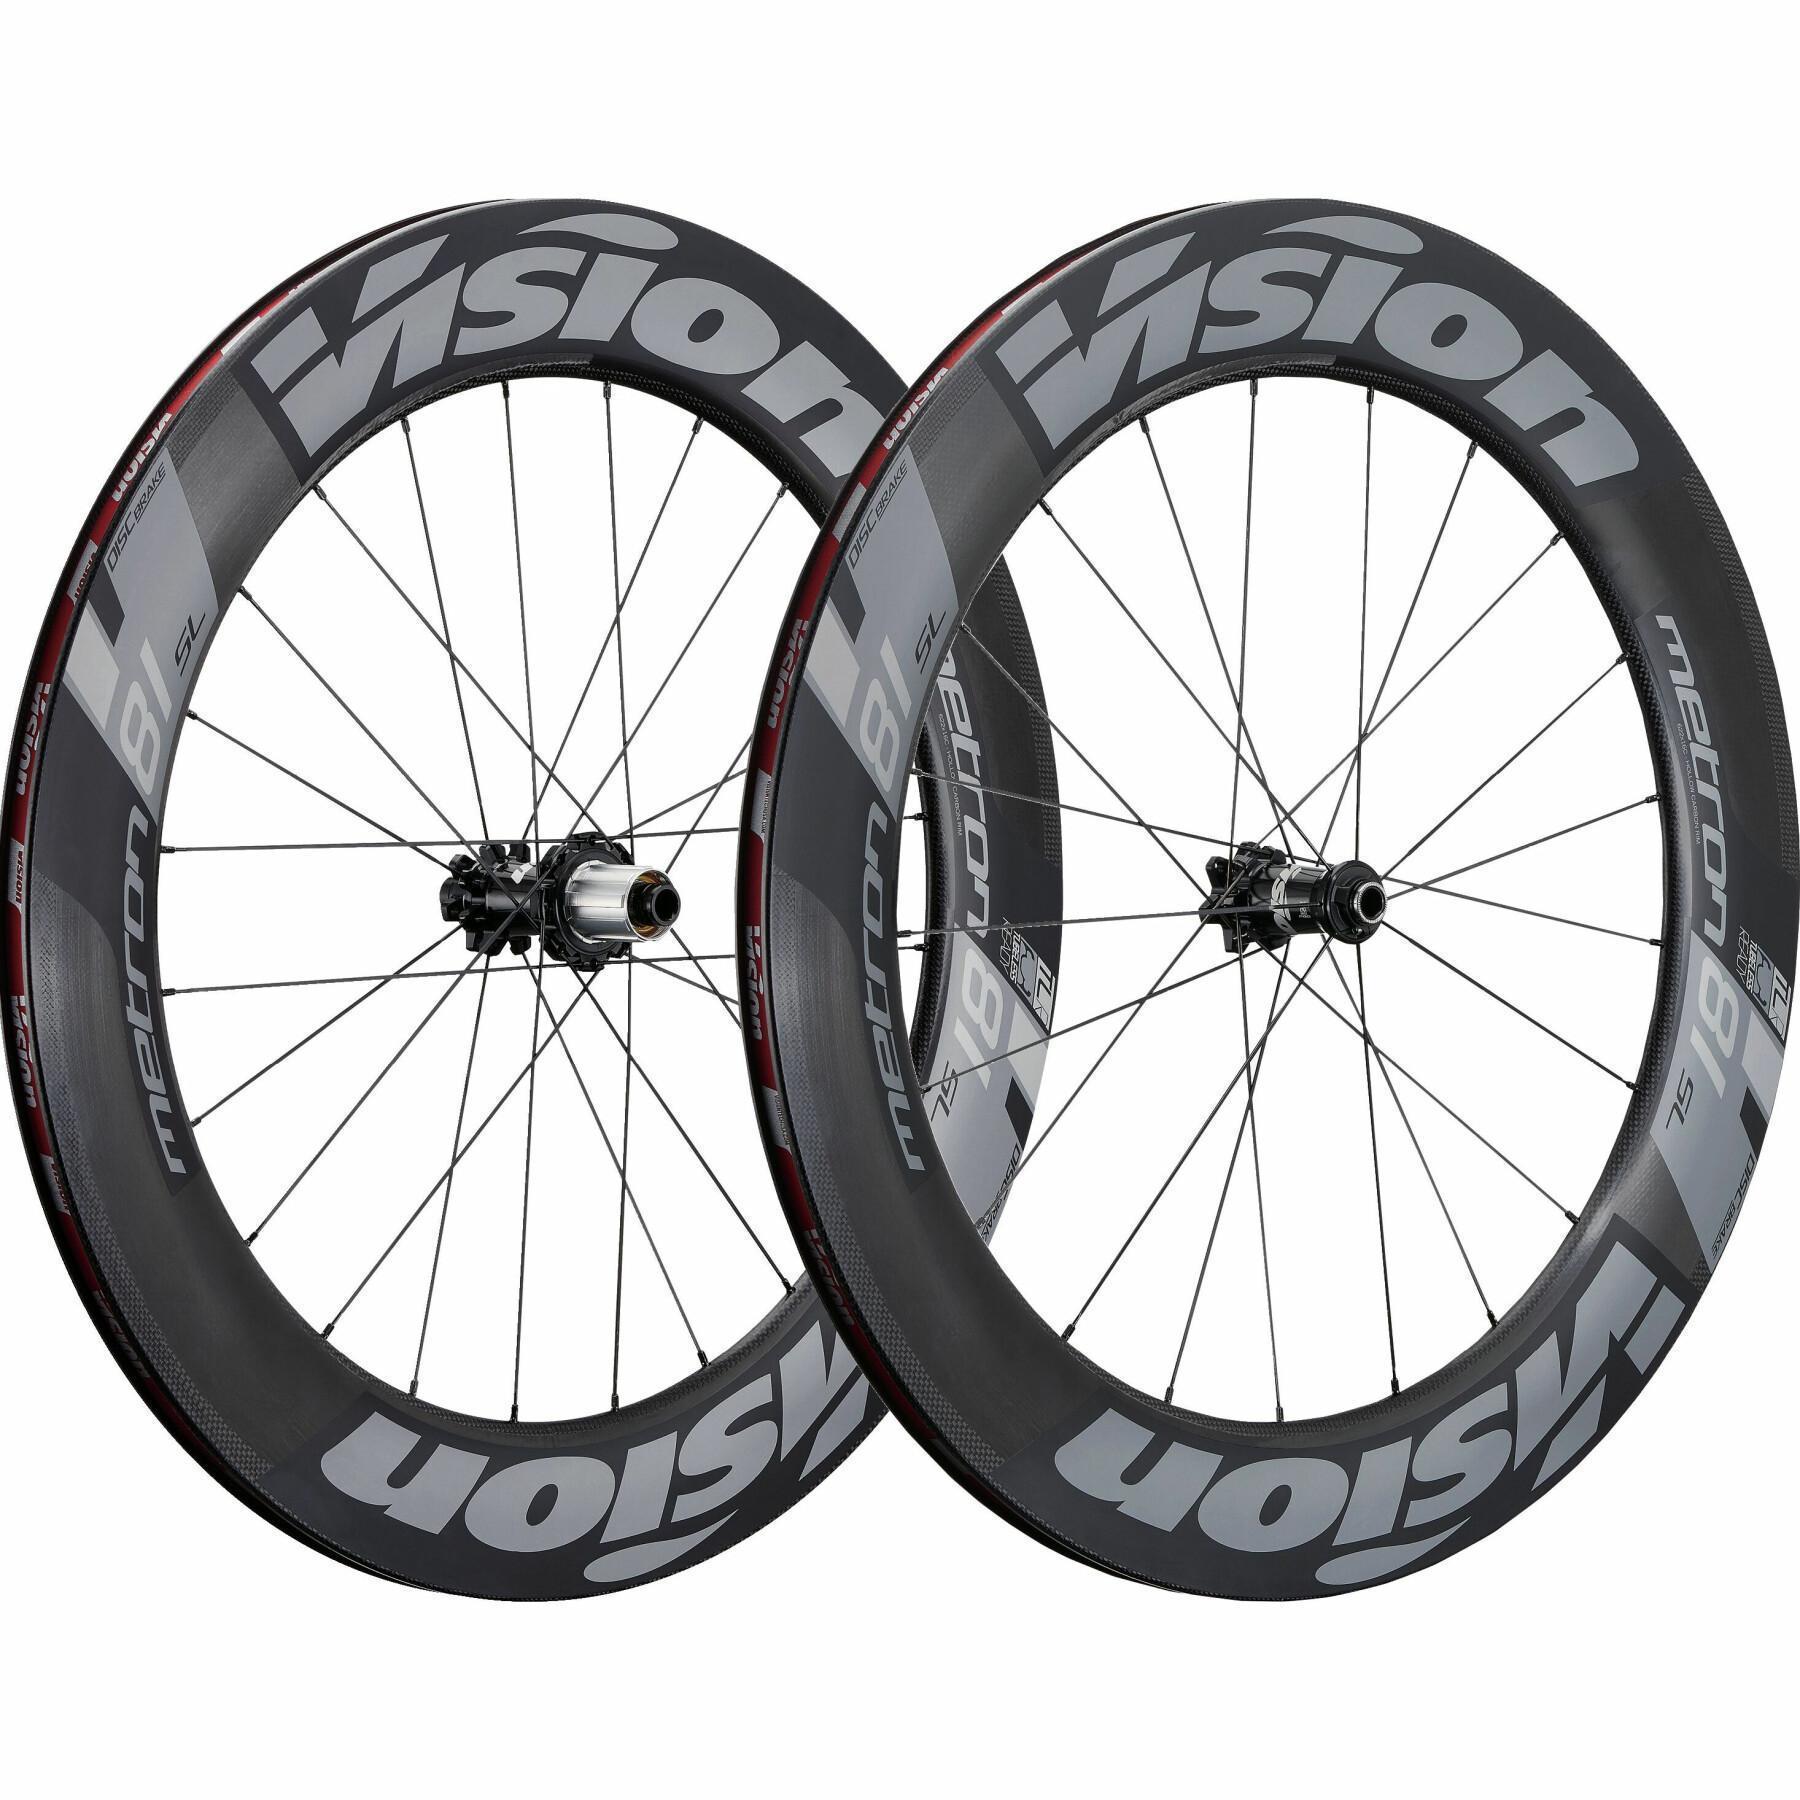 Disc wheels with tyres Vision Metron 81 sl center locks tl sh11